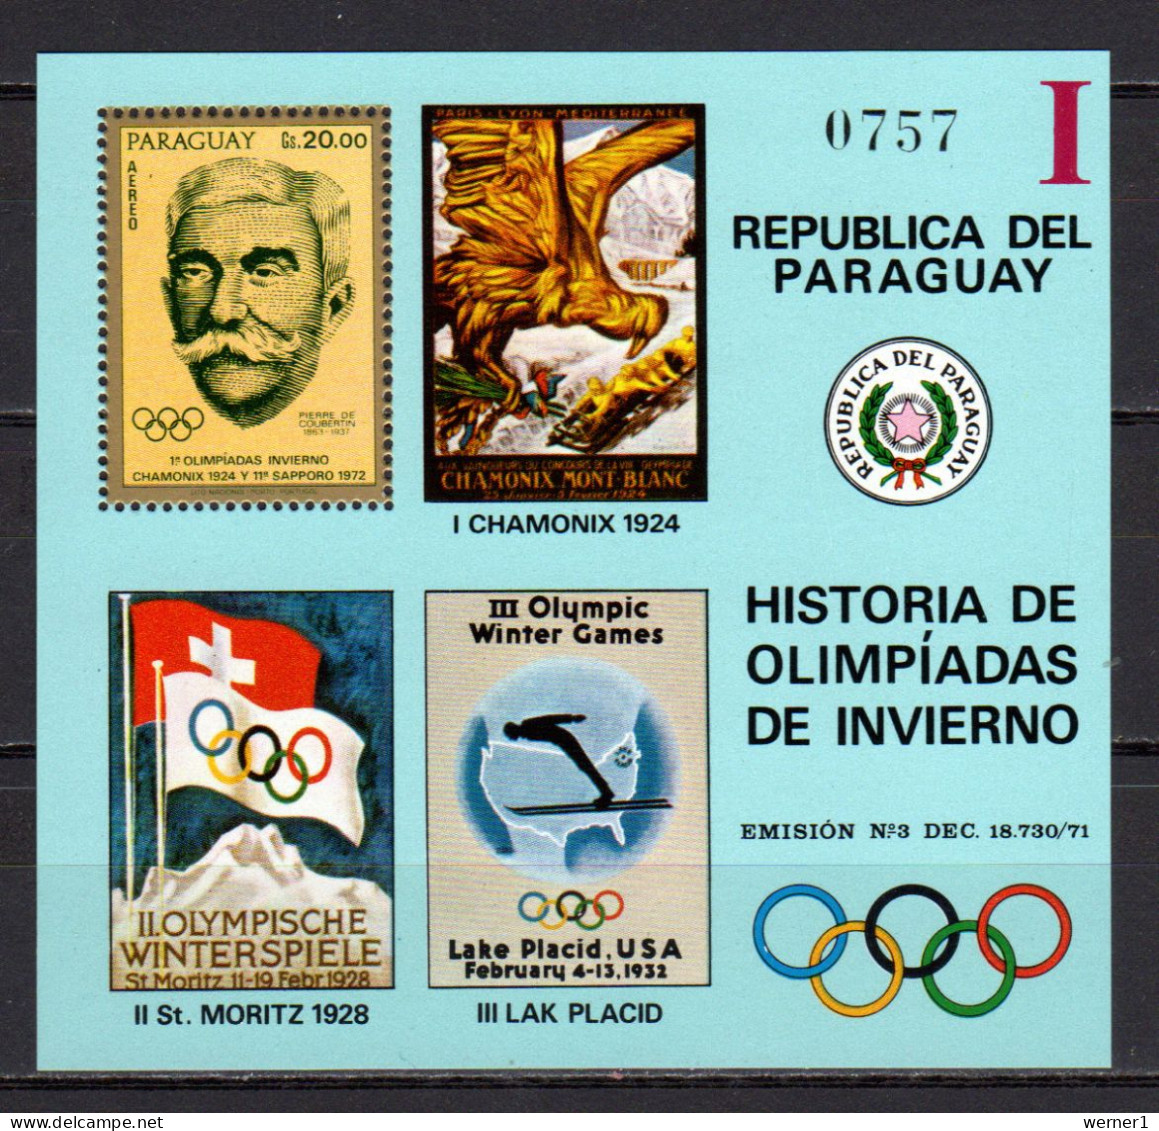 Paraguay 1972 Olympic Winter Games S/s "I" MNH - Inverno1972: Sapporo